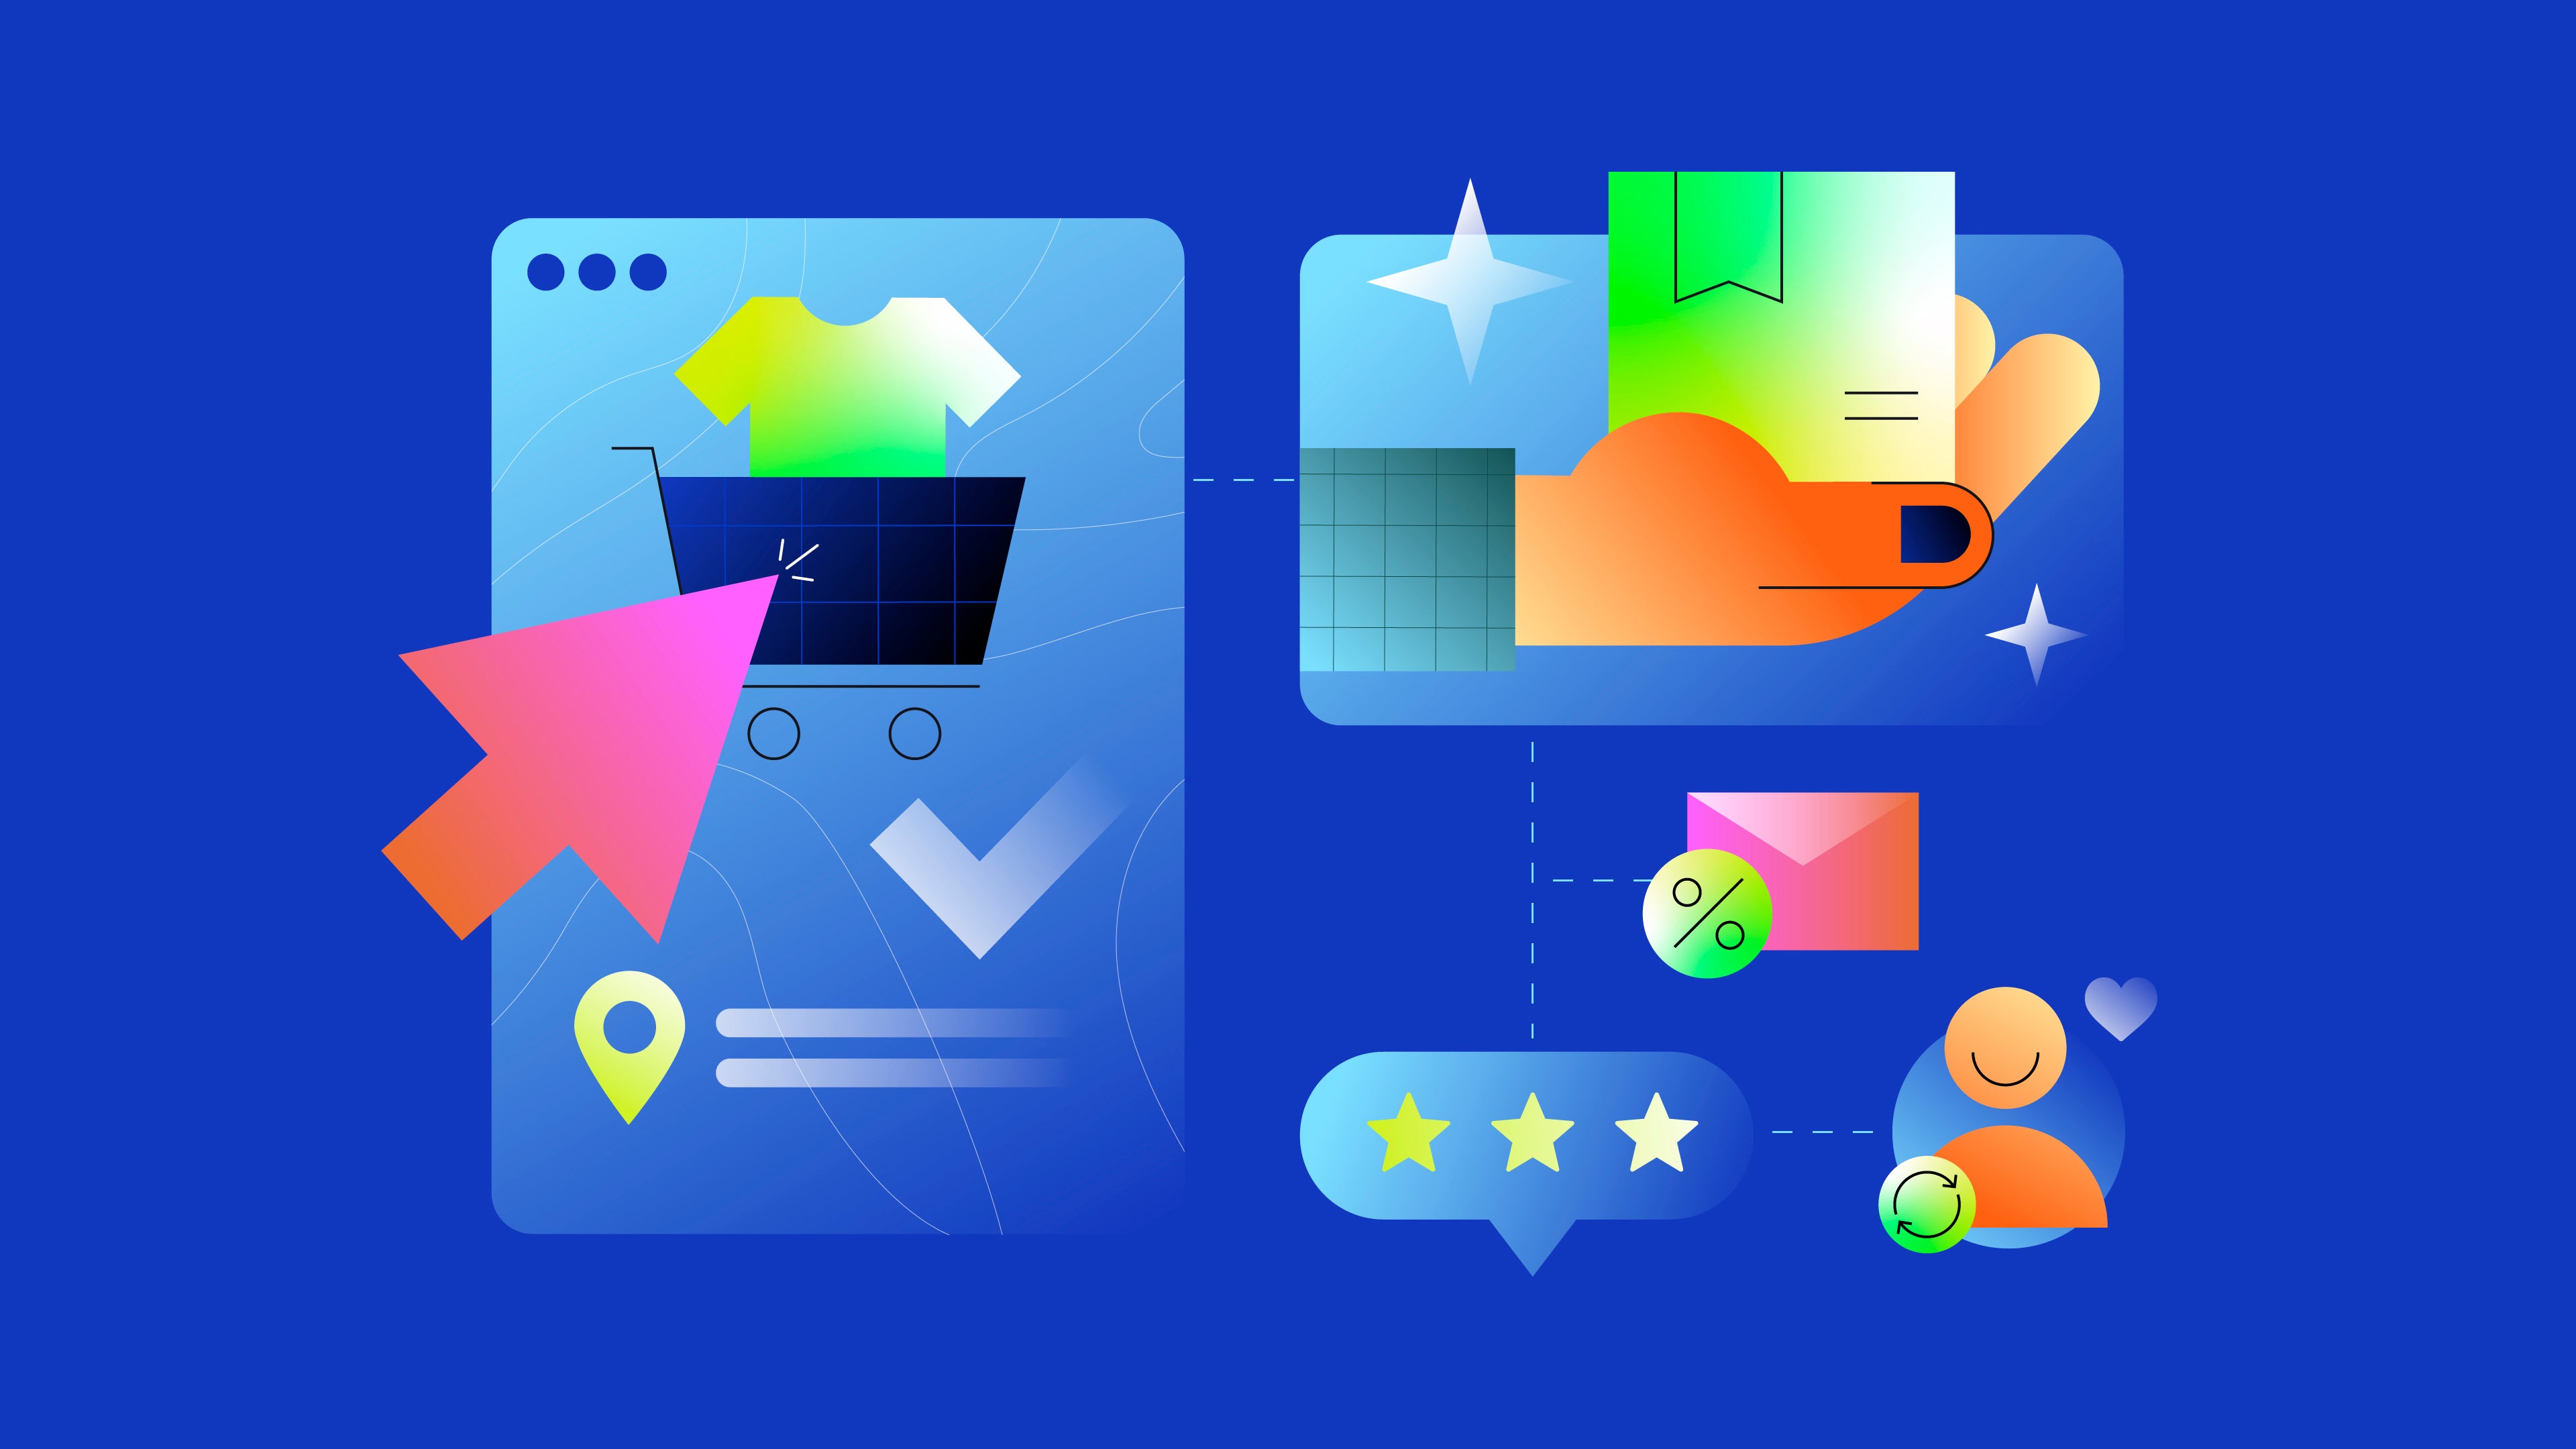 Graphic illustration showing online shopping elements like cart, cursor, and reviews on a vibrant blue background.